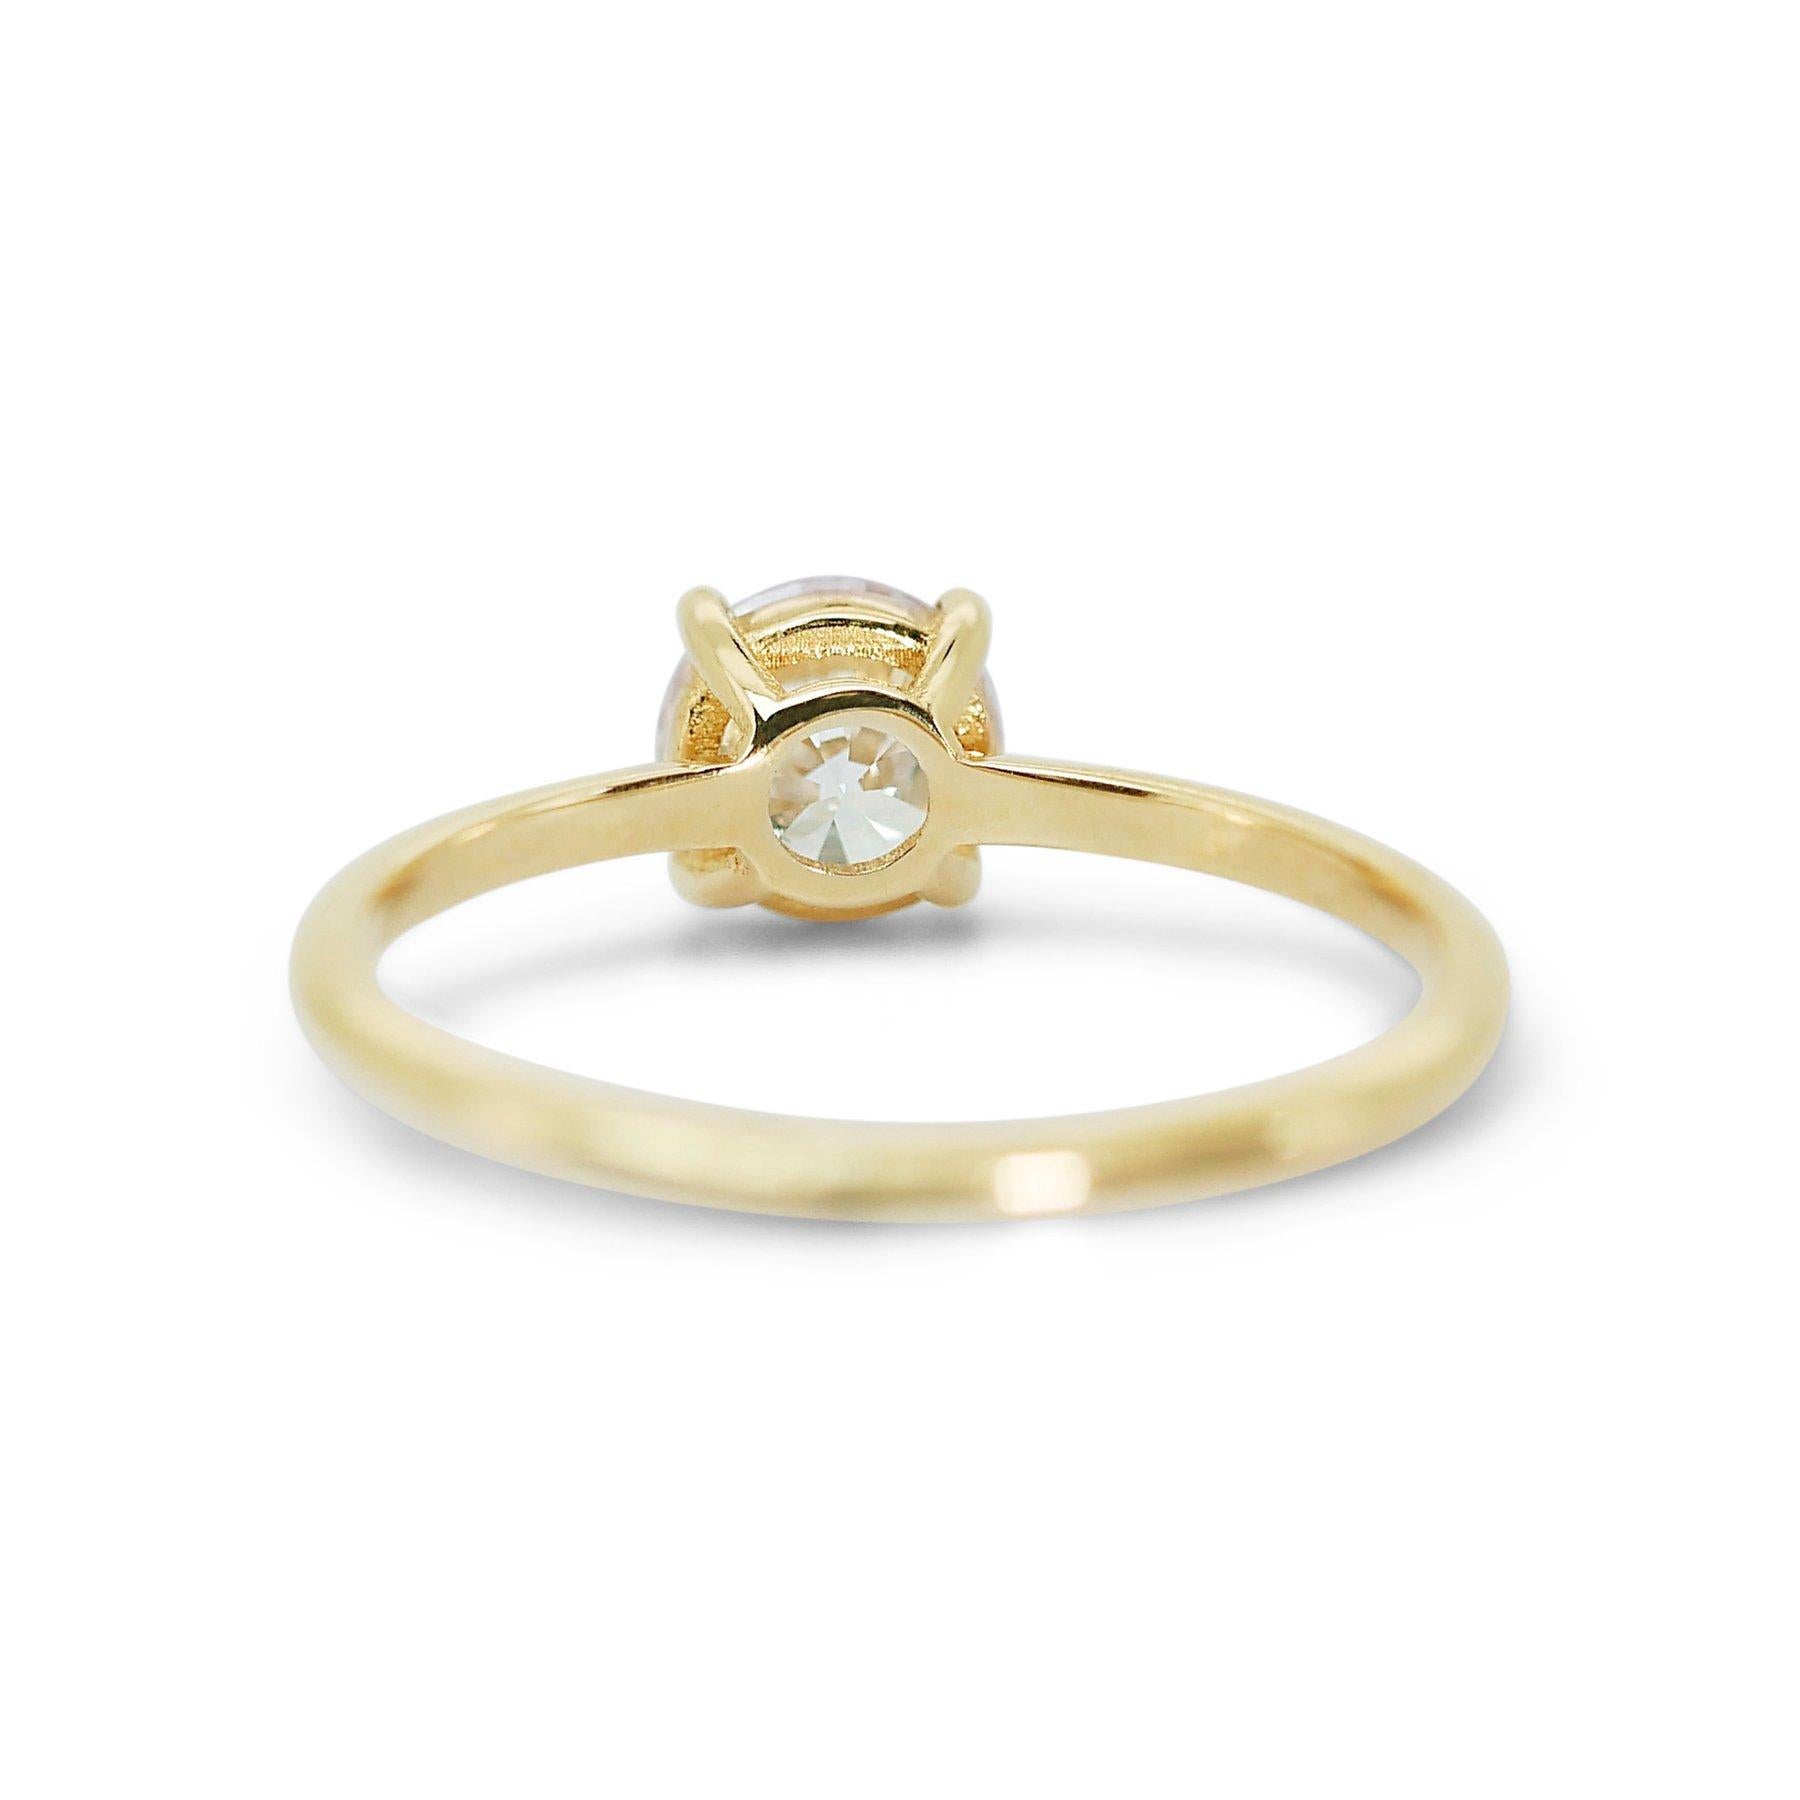 Majestic 18K Yellow Gold Solitaire Diamond Ring with 1.03ct - GIA Certified 1